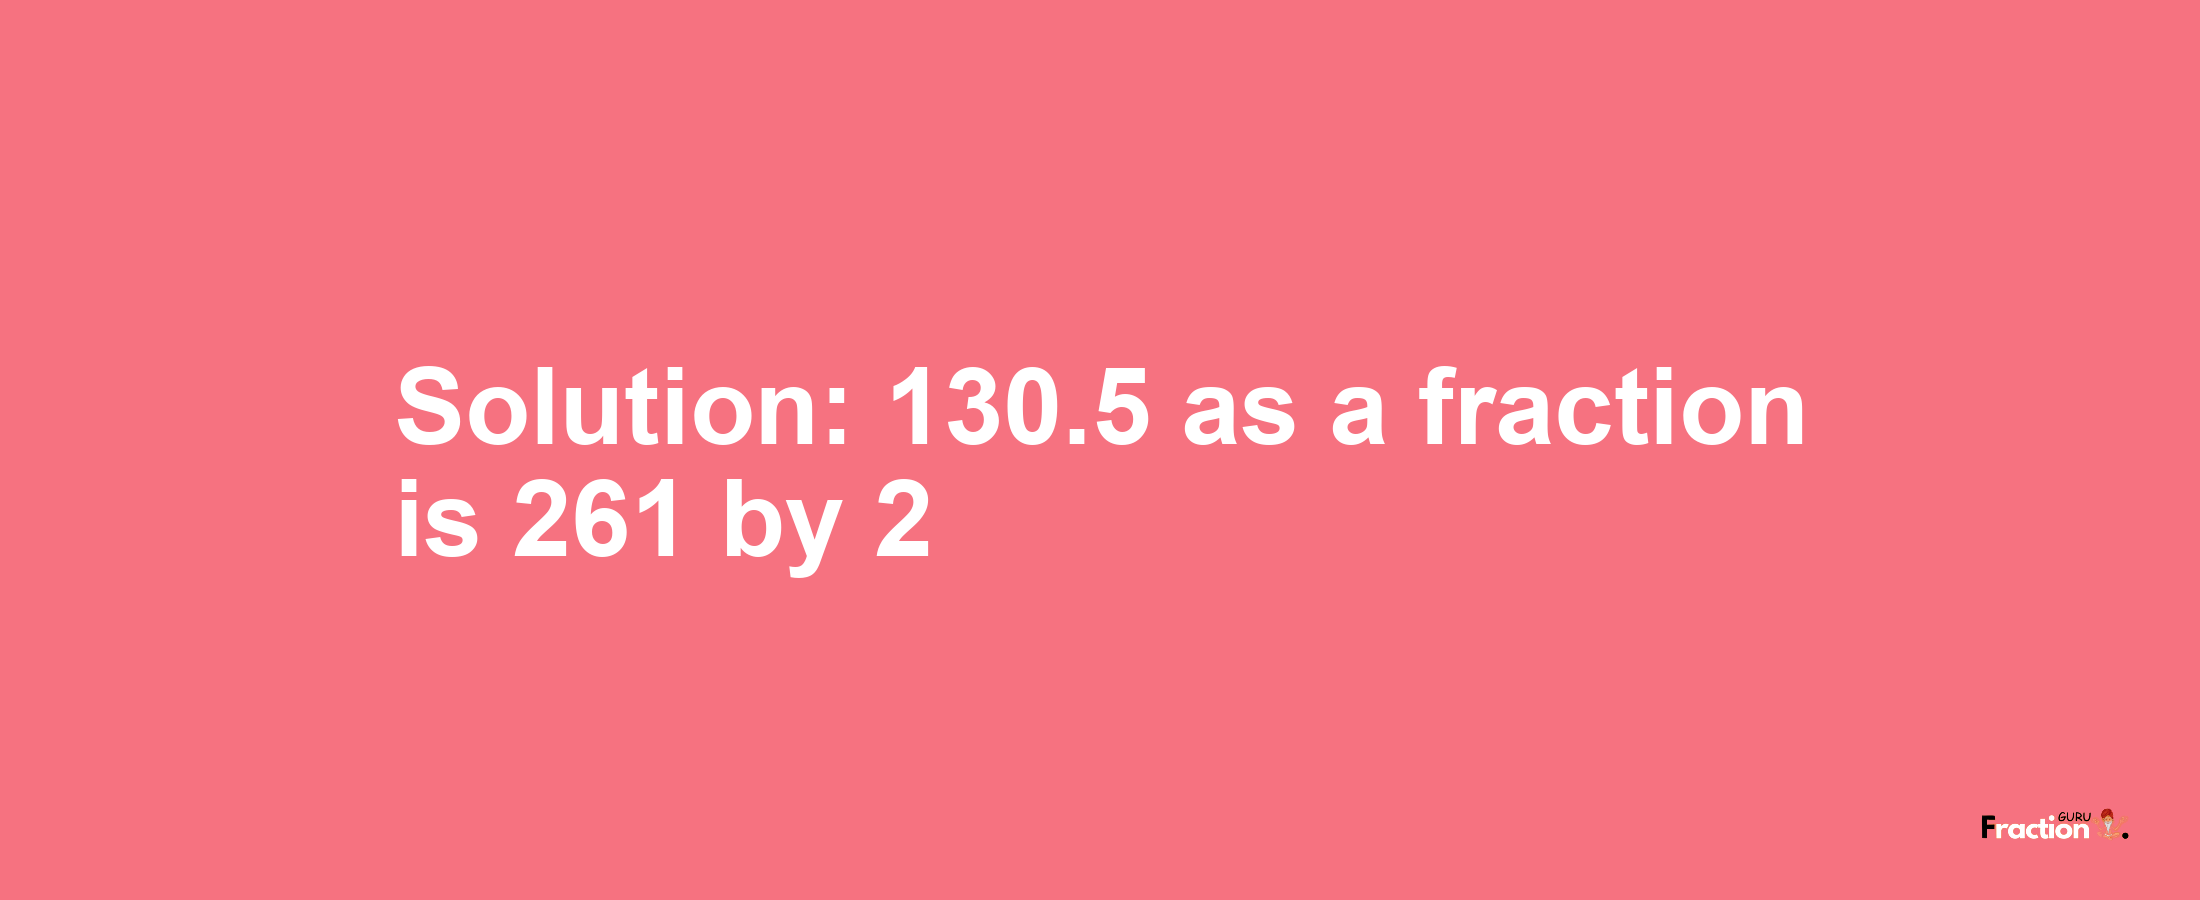 Solution:130.5 as a fraction is 261/2